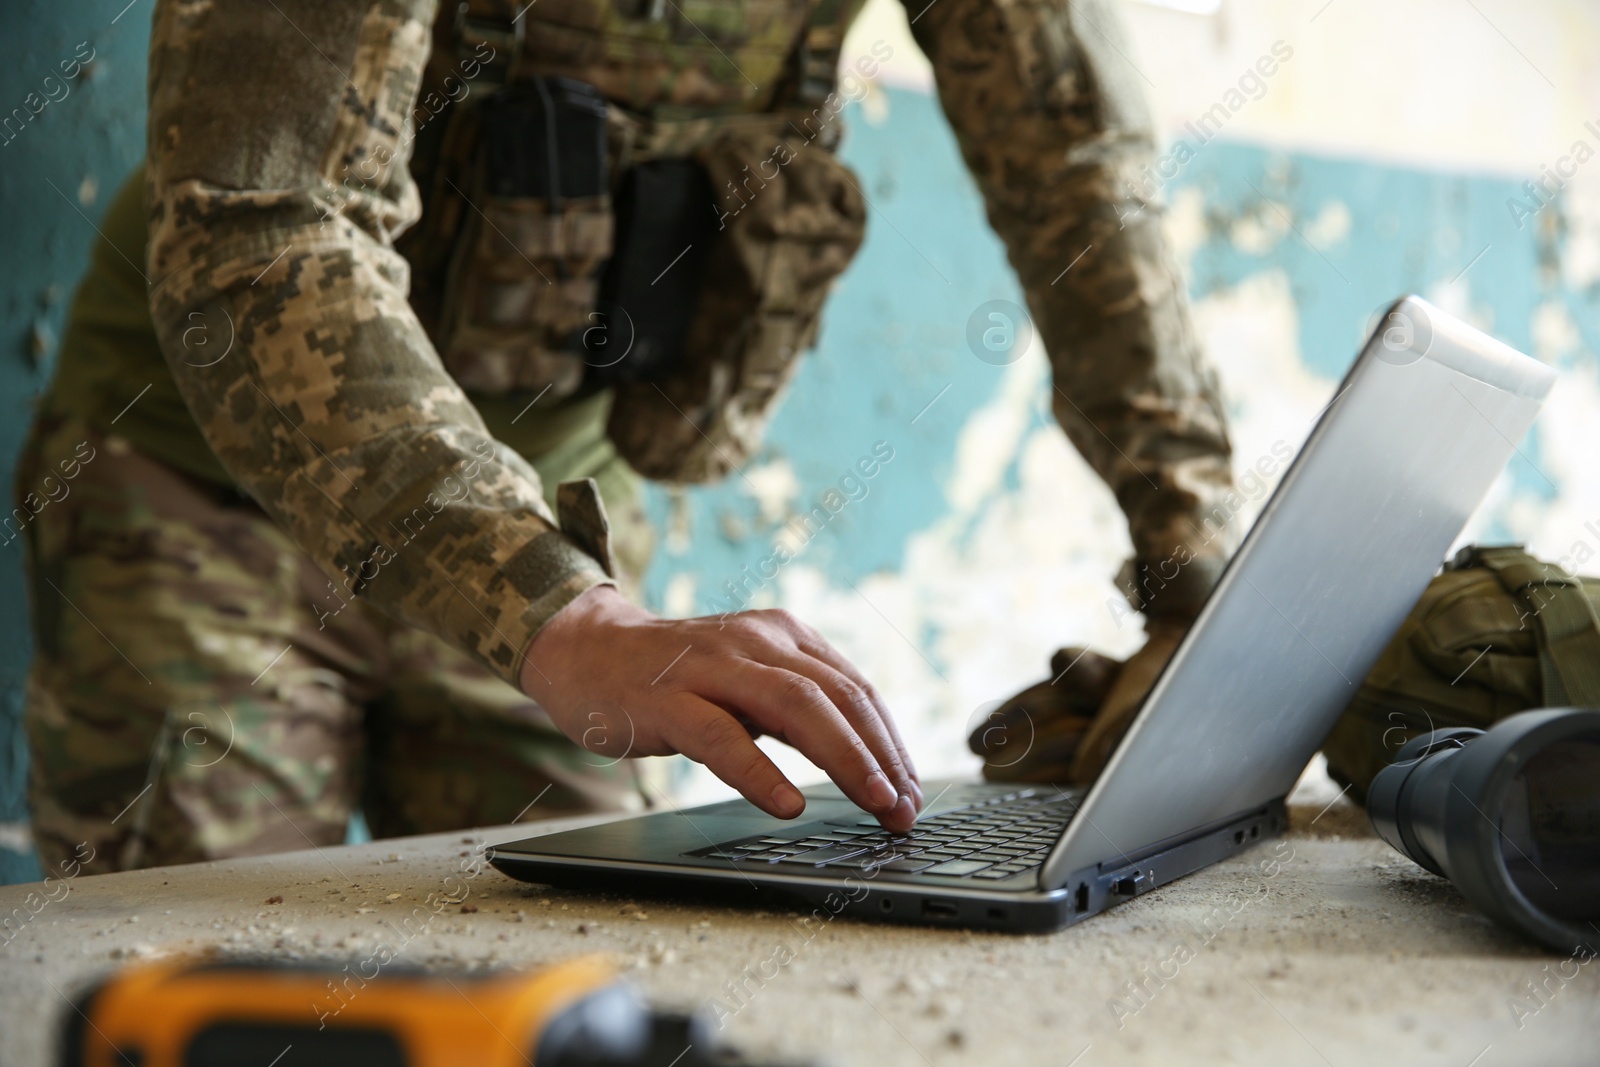 Photo of Military mission. Soldier in uniform using laptop at table inside abandoned building, closeup